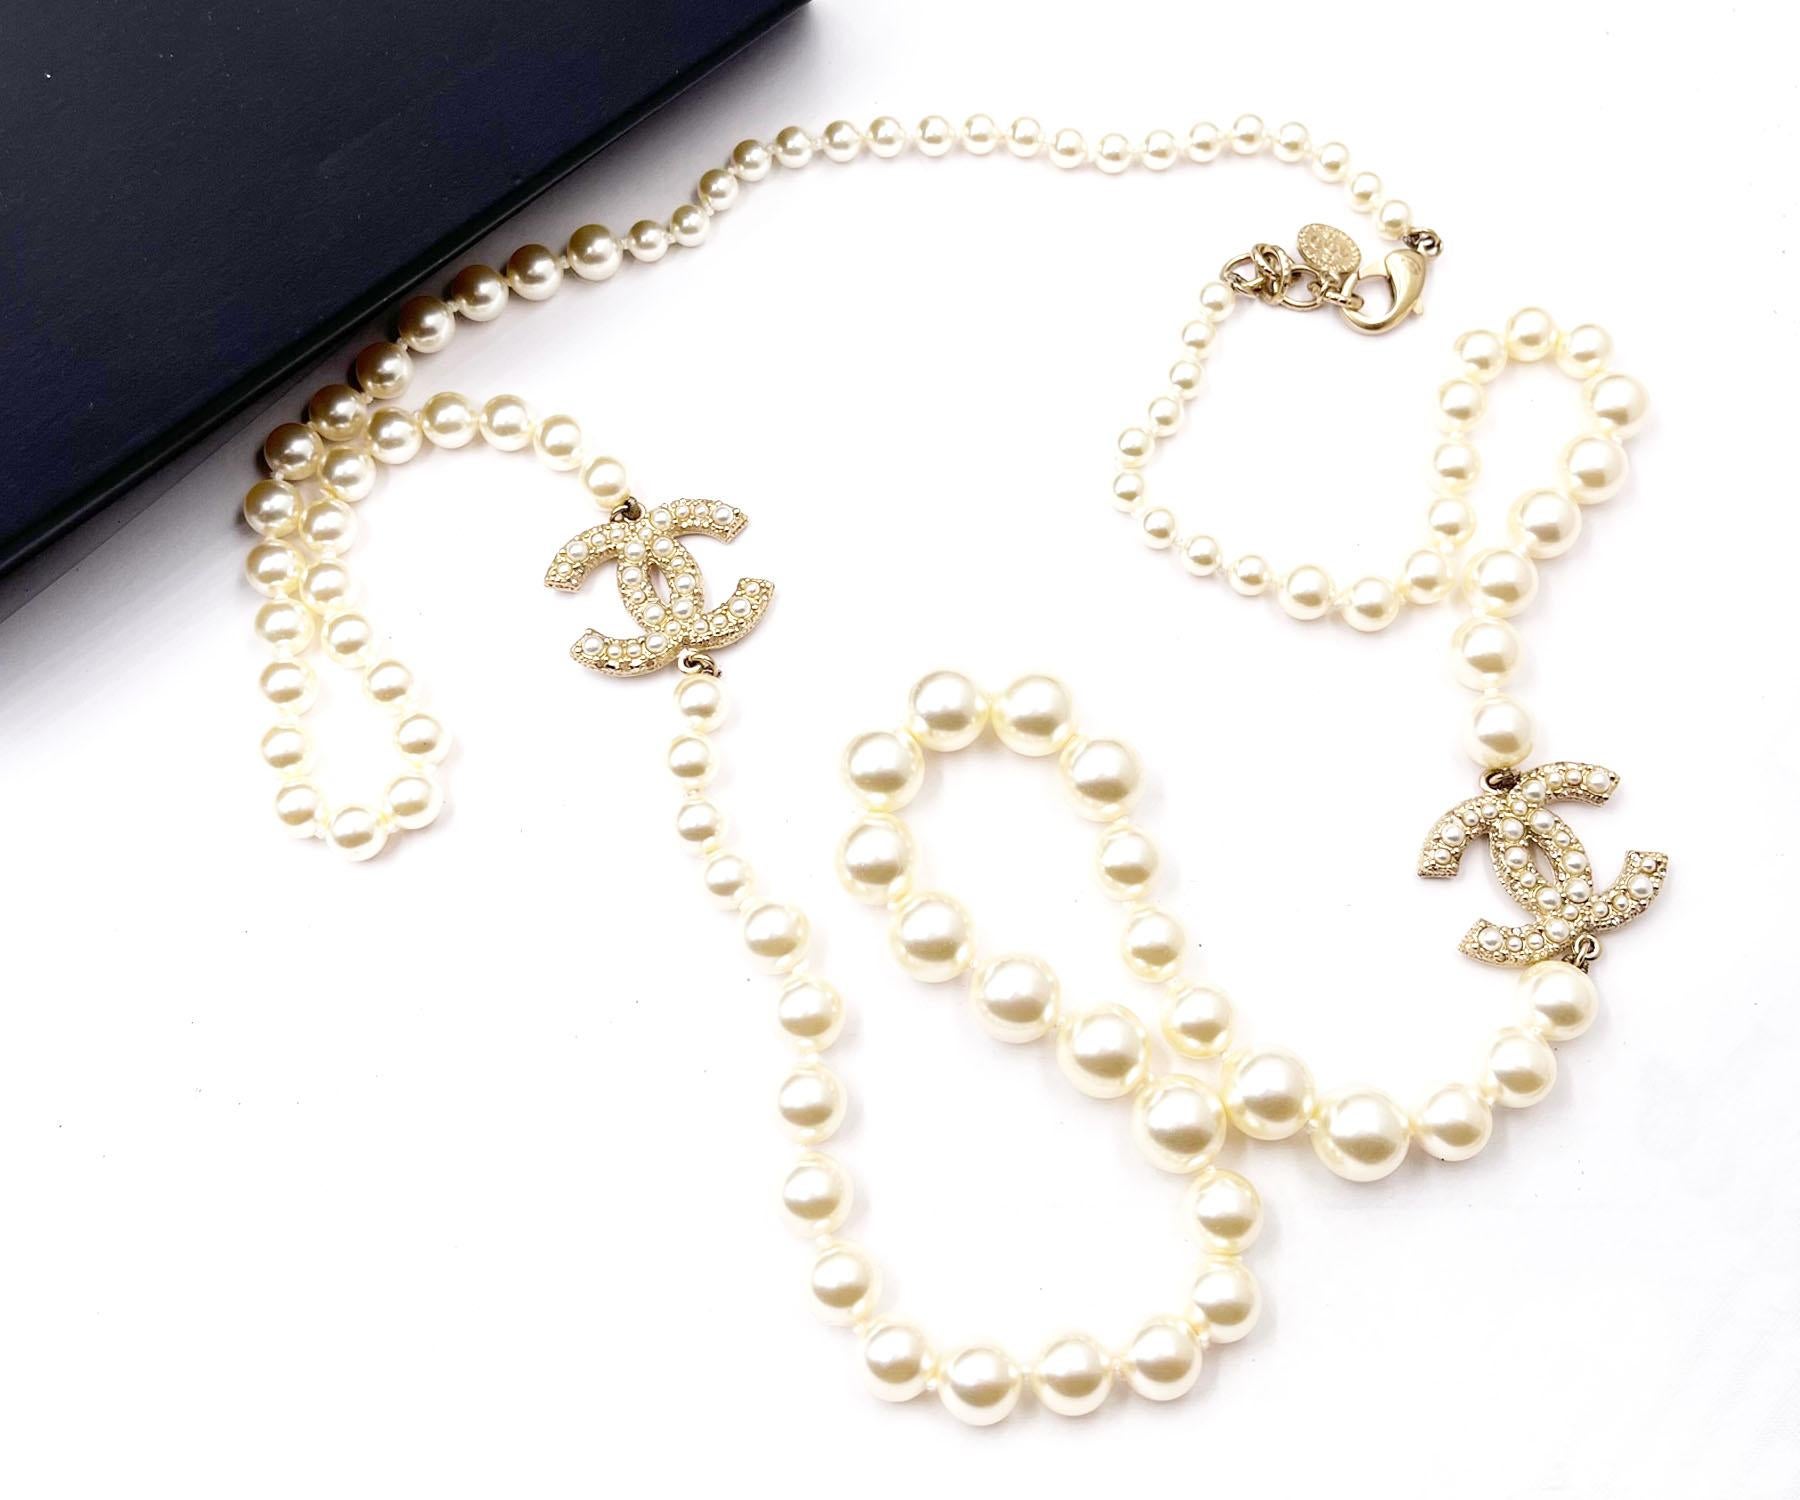 Chanel Classic Gold CC Scatter Pearl Pearl Long Necklace 100 yr Anniversary

*Marked 17
*Made in France
*Comes with the original box

-It is approximately 40